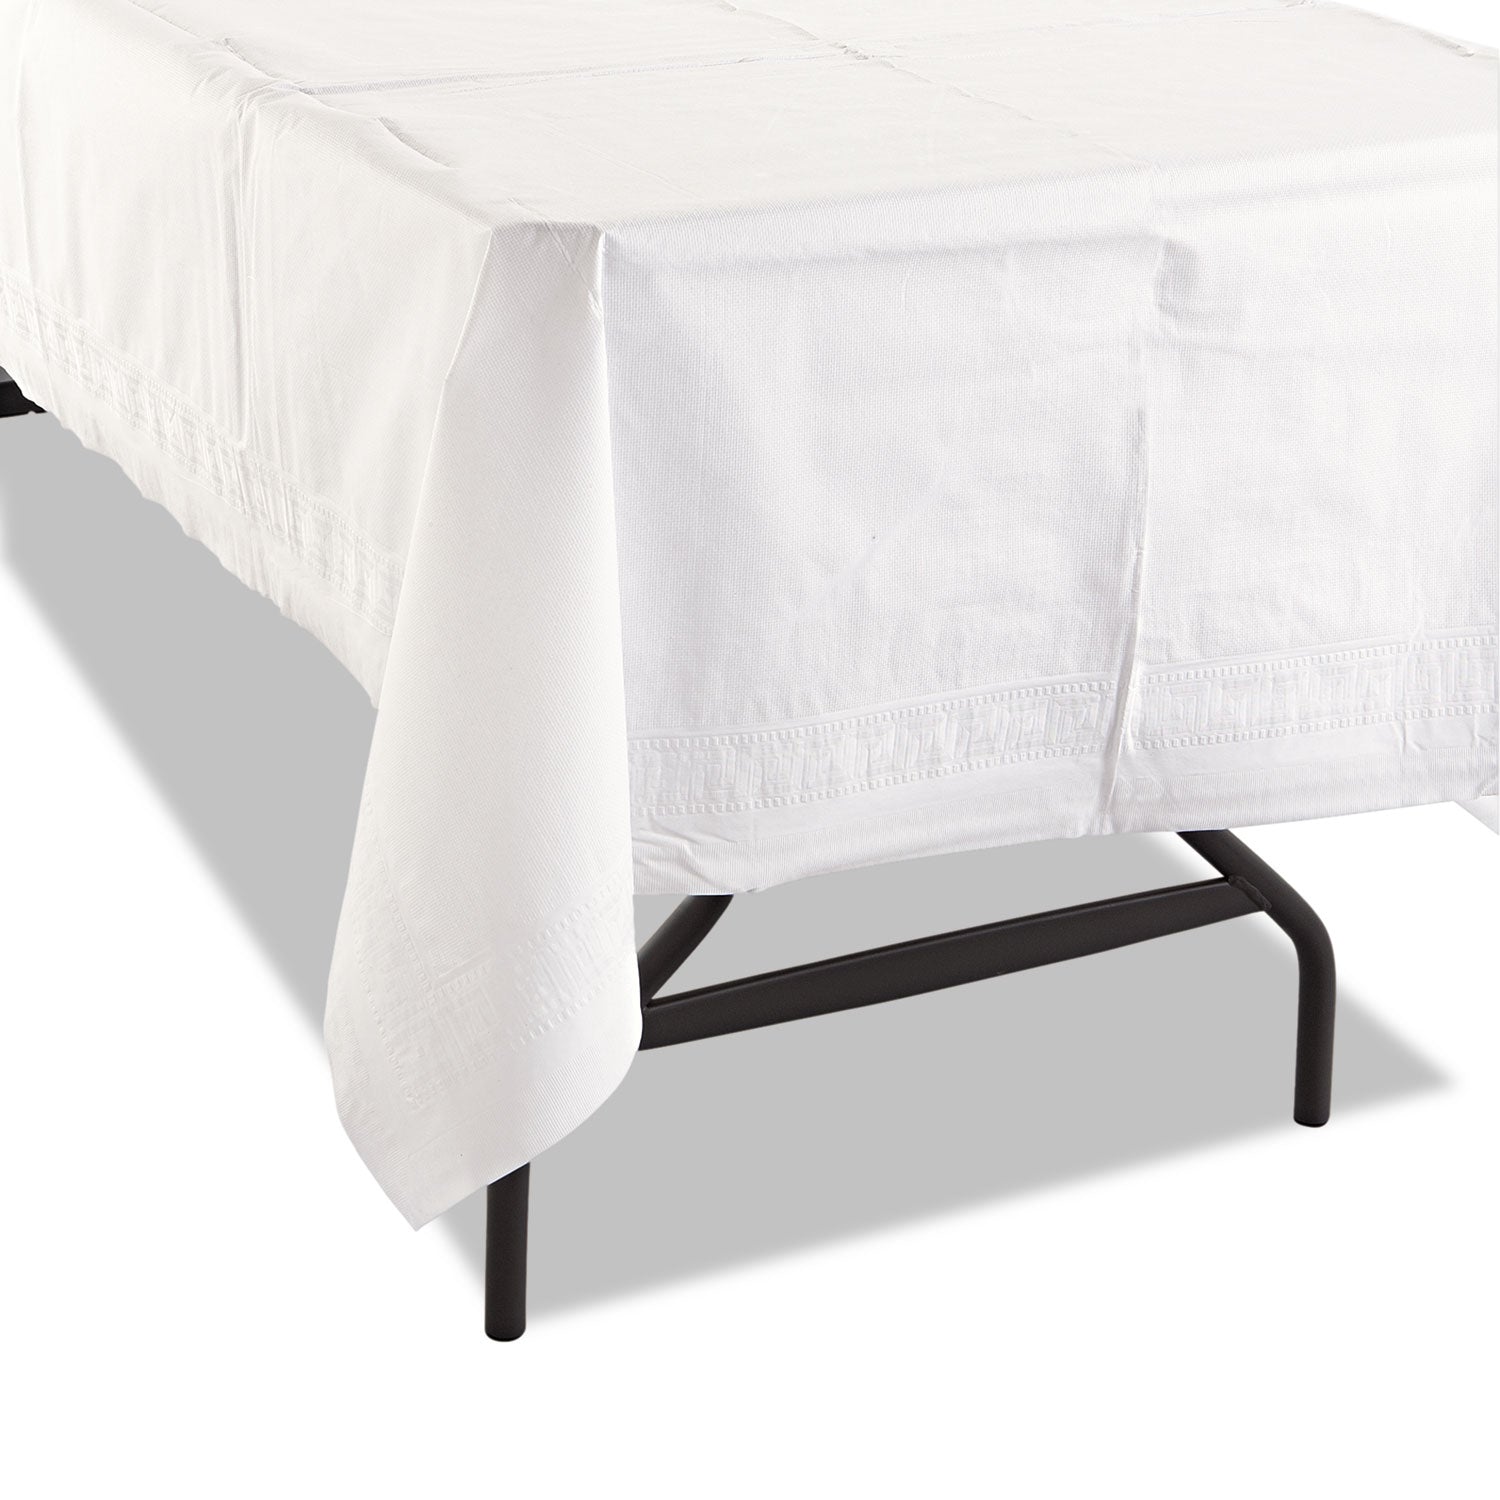 Cellutex Table Covers, Tissue/Polylined, 54" x 108", White, 25/Carton - 